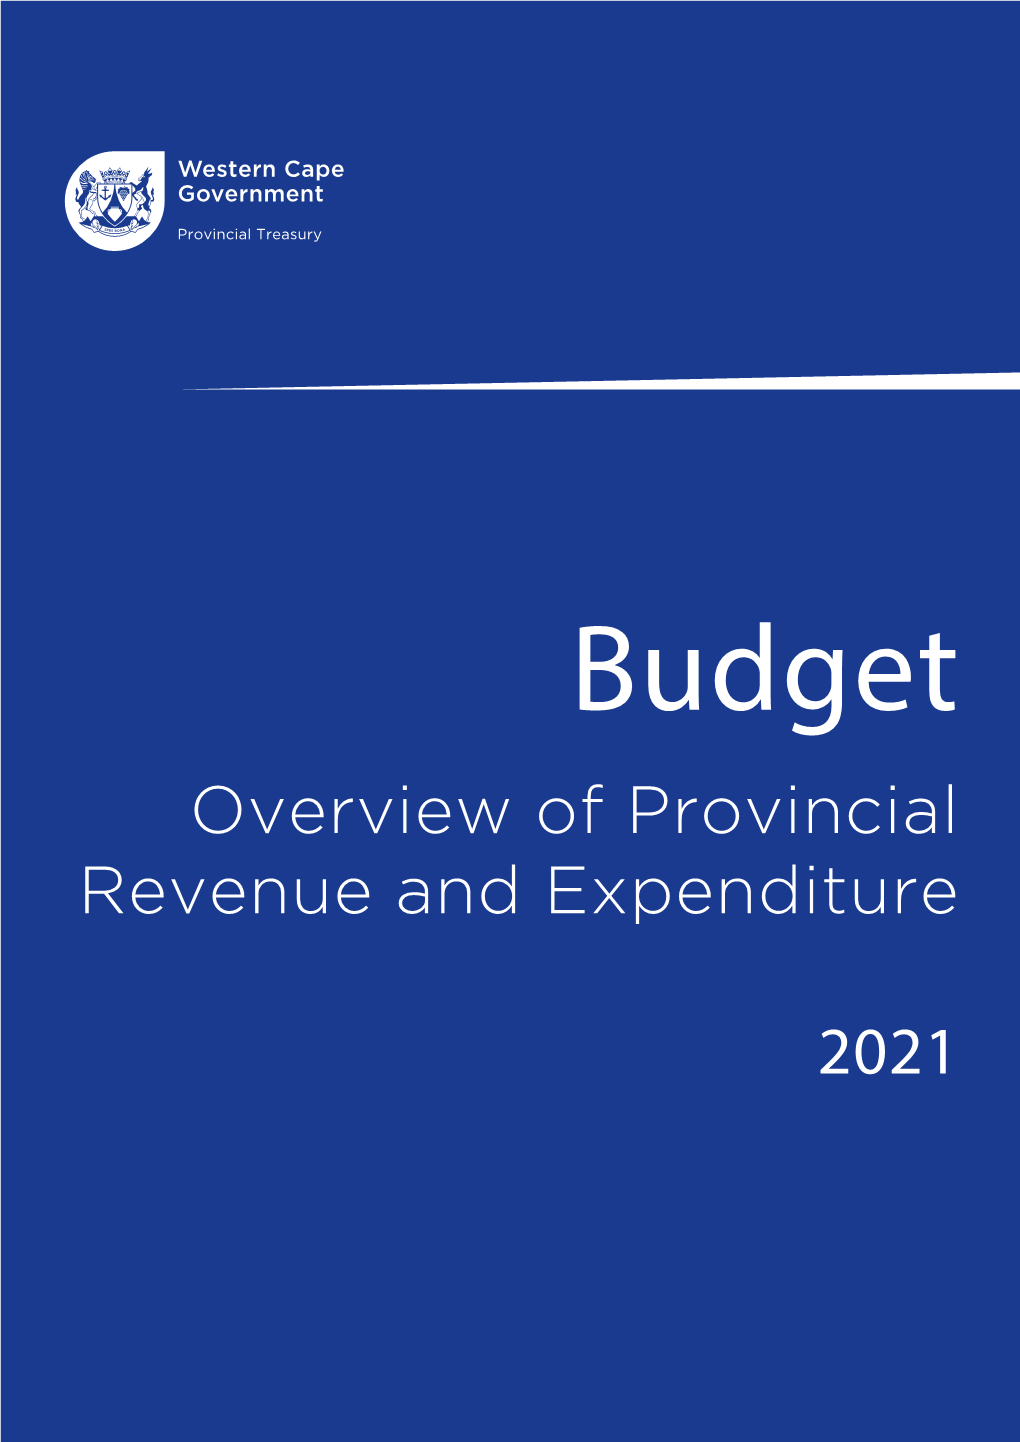 Overview of Provincial Revenue and Expenditure 2021